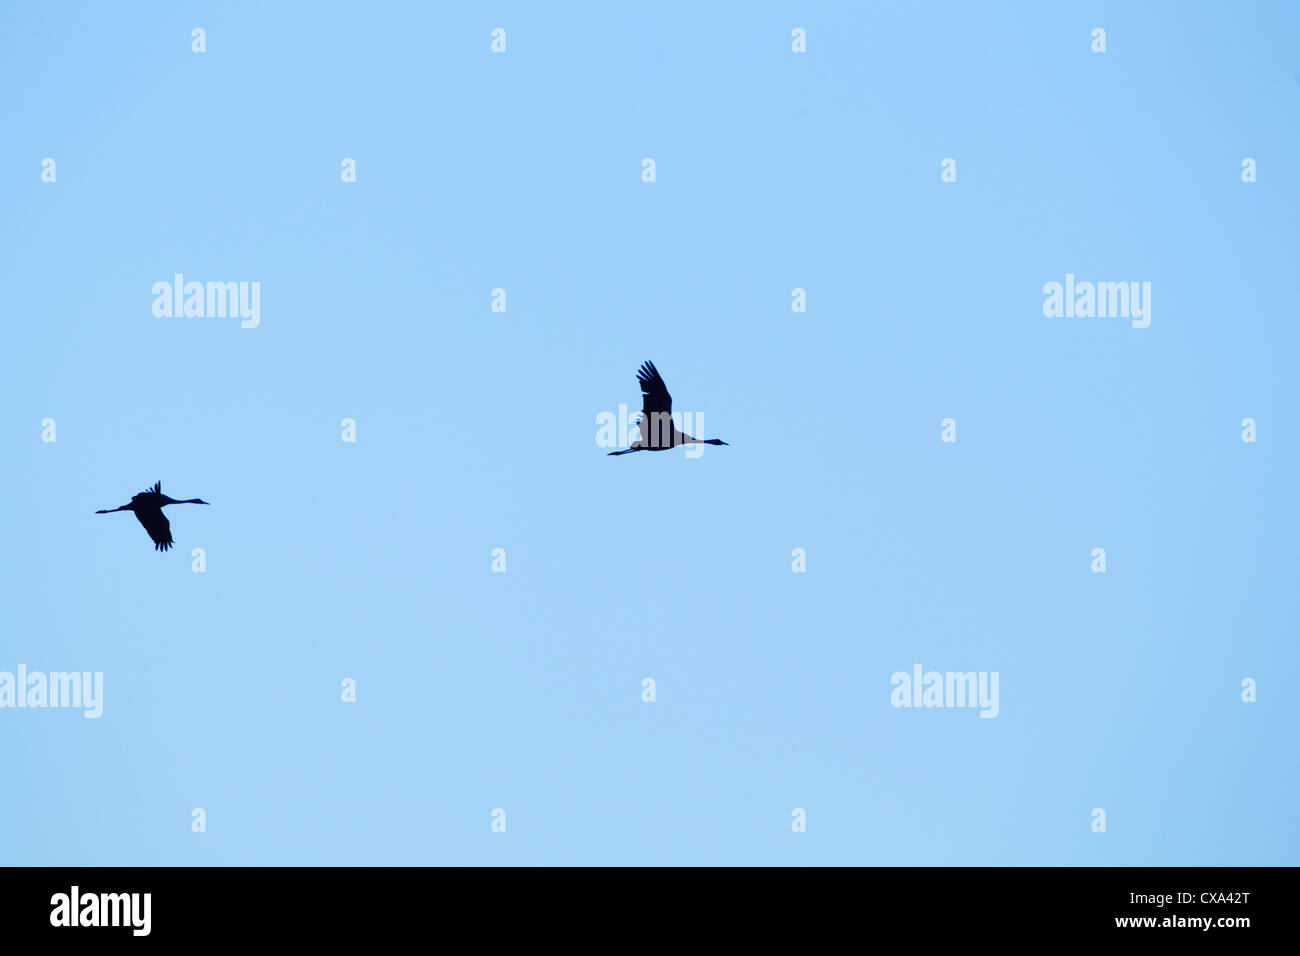 Two common cranes (Grus grus) in flight, silhouetted against a blue sky Stock Photo